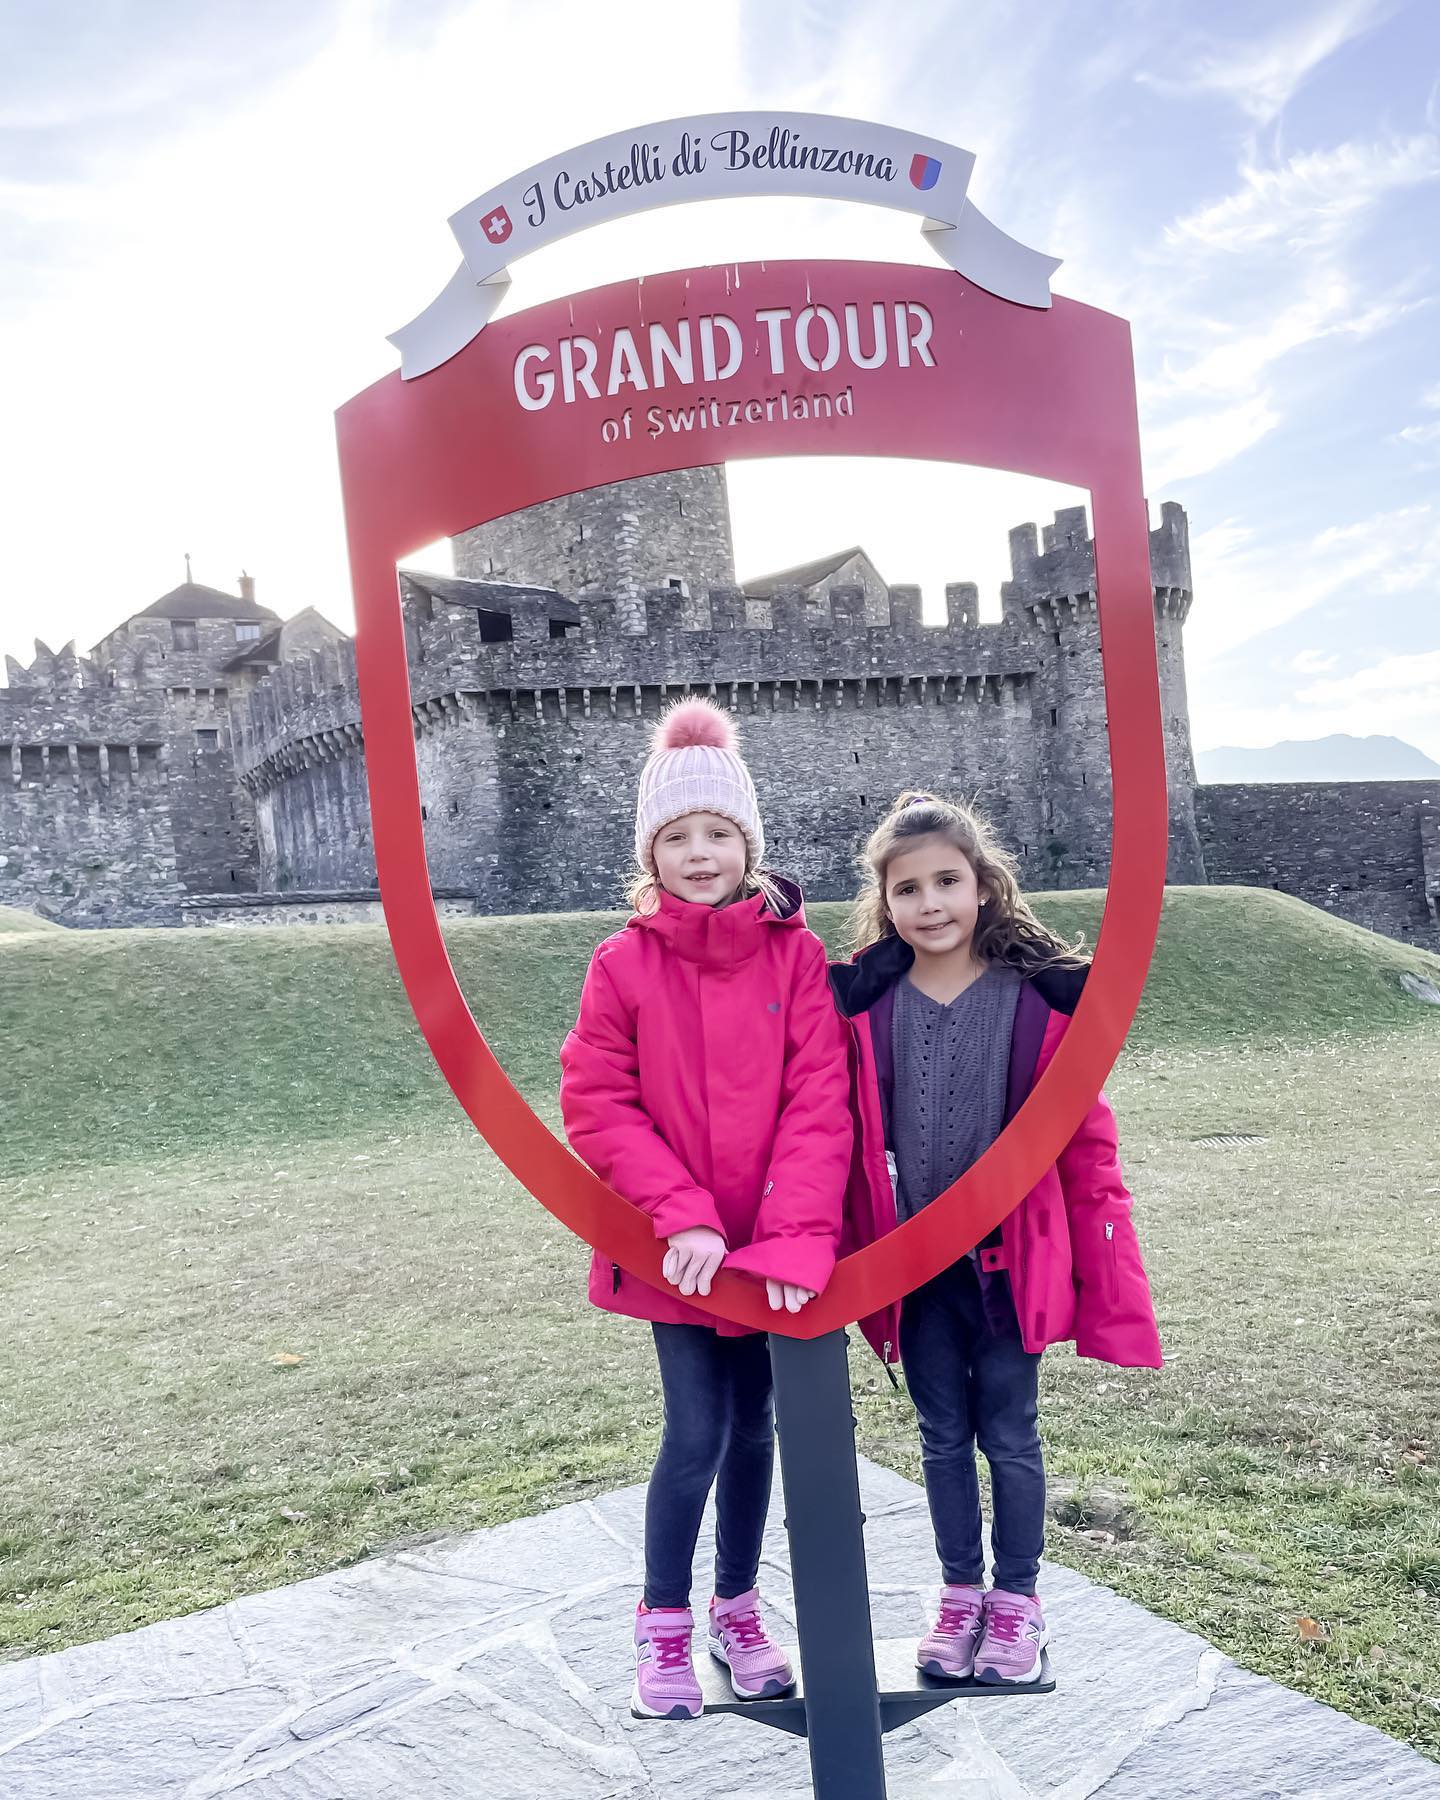 The Castles of Bellinzona - Visiting 40 Photo Spots in the Grand Tour of Switzerland 